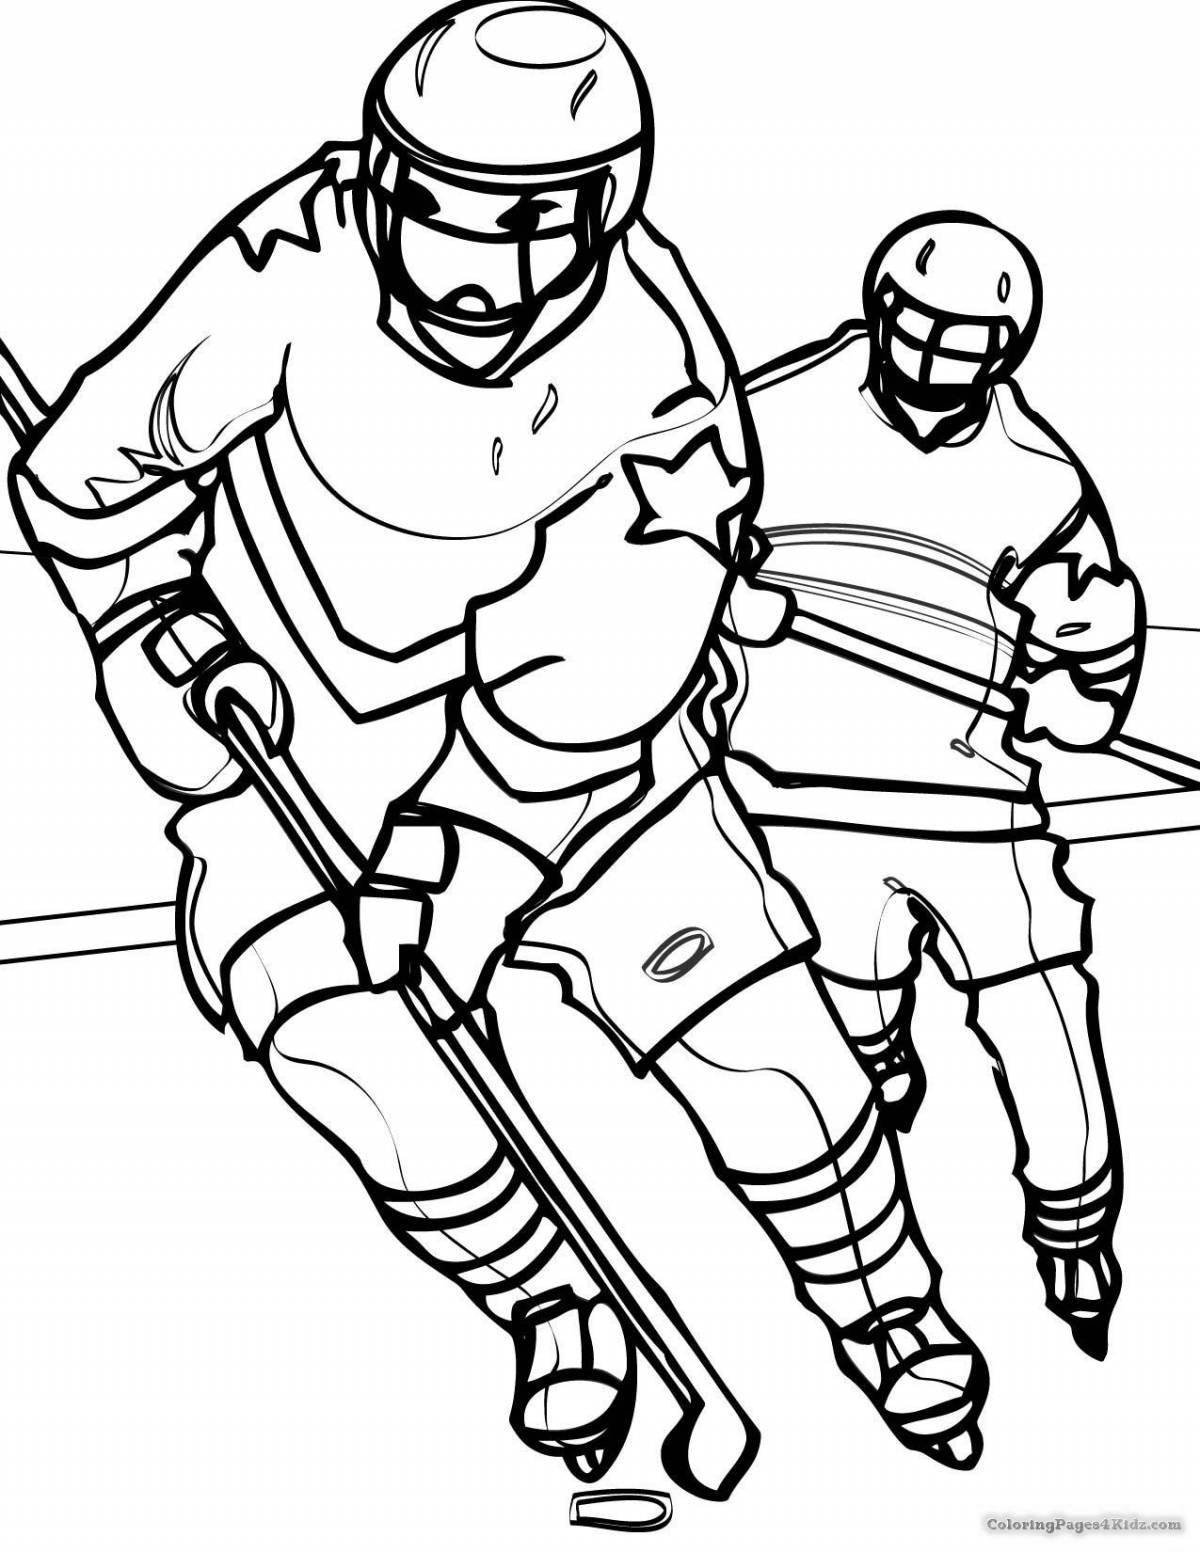 Colorful hockey coloring book for kids